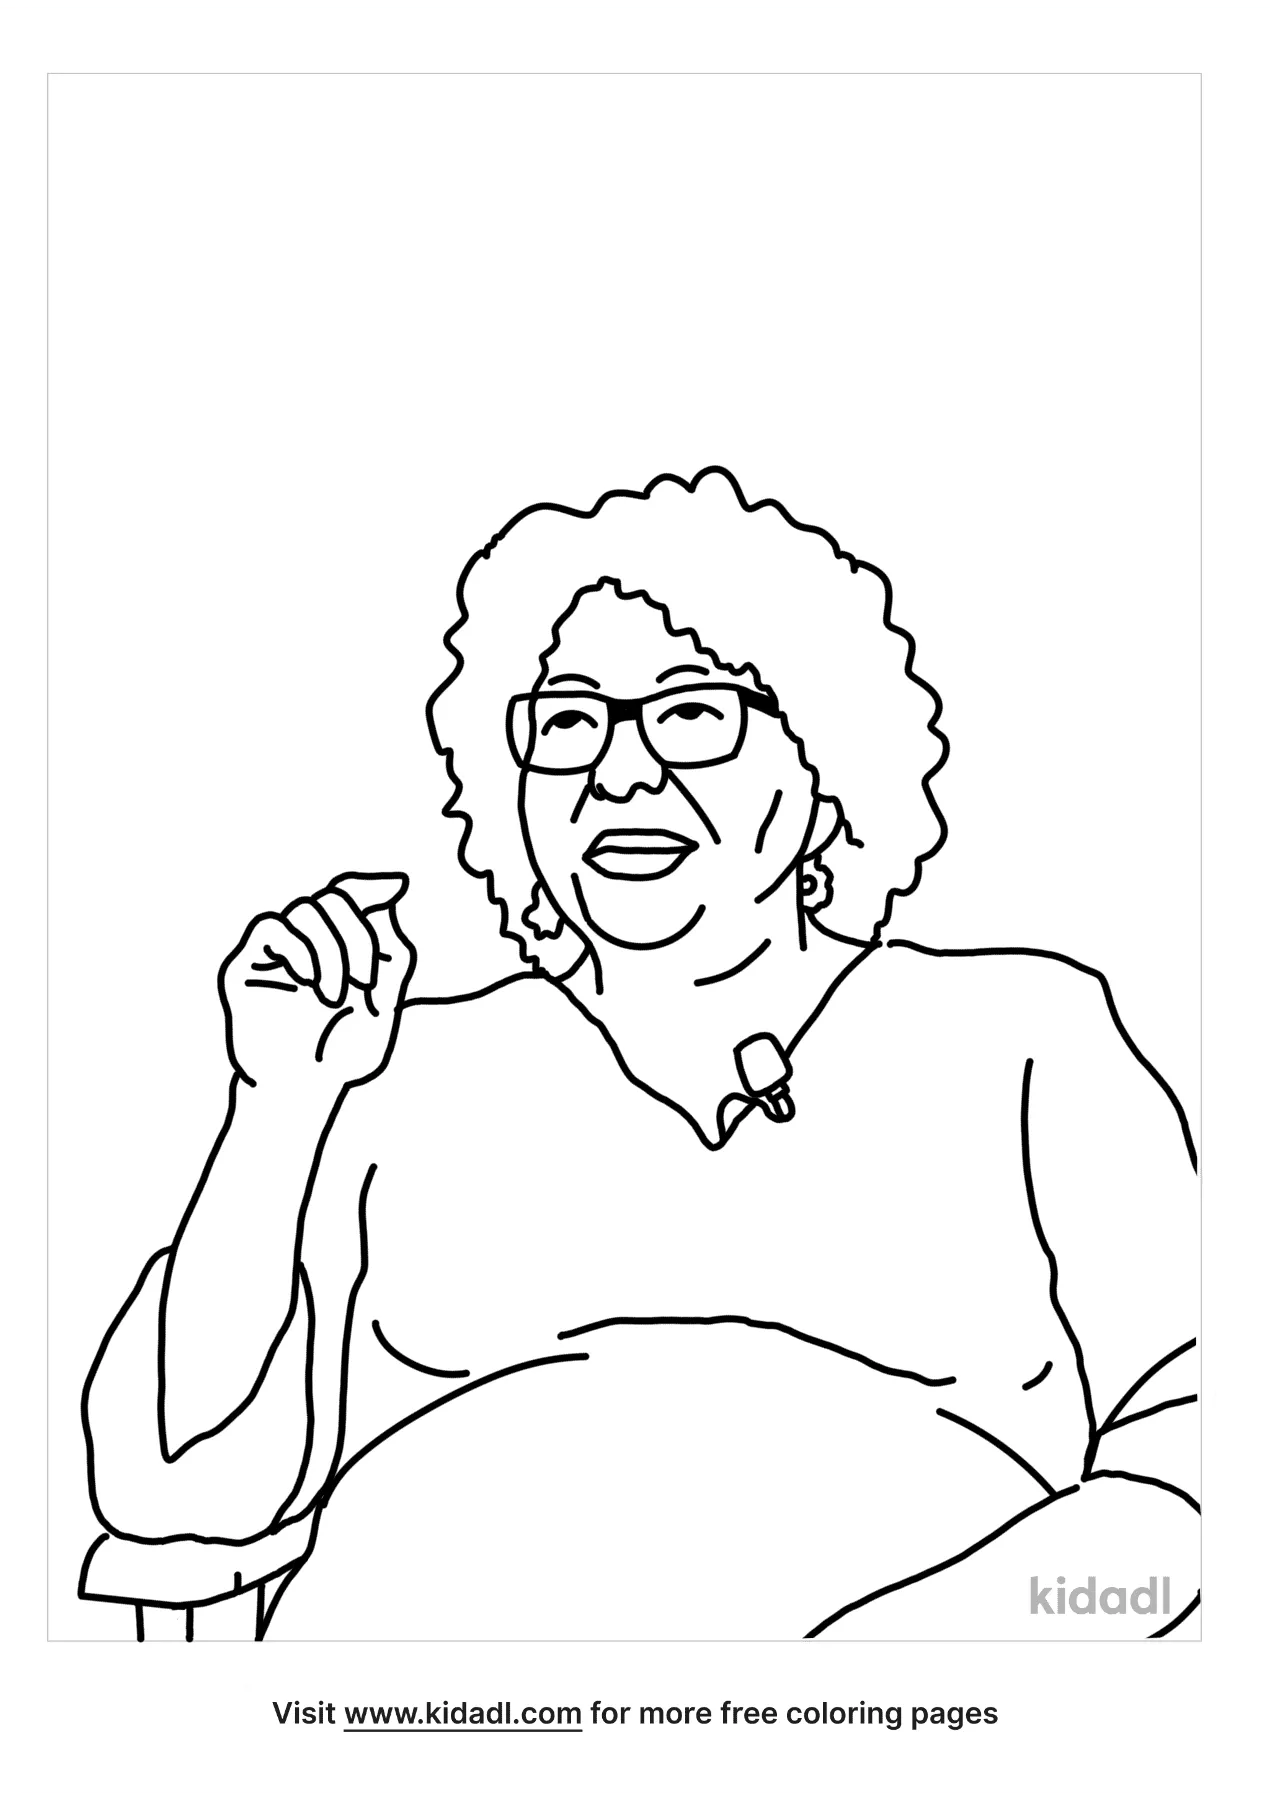 Free sonia sotomayor coloring page coloring page printables